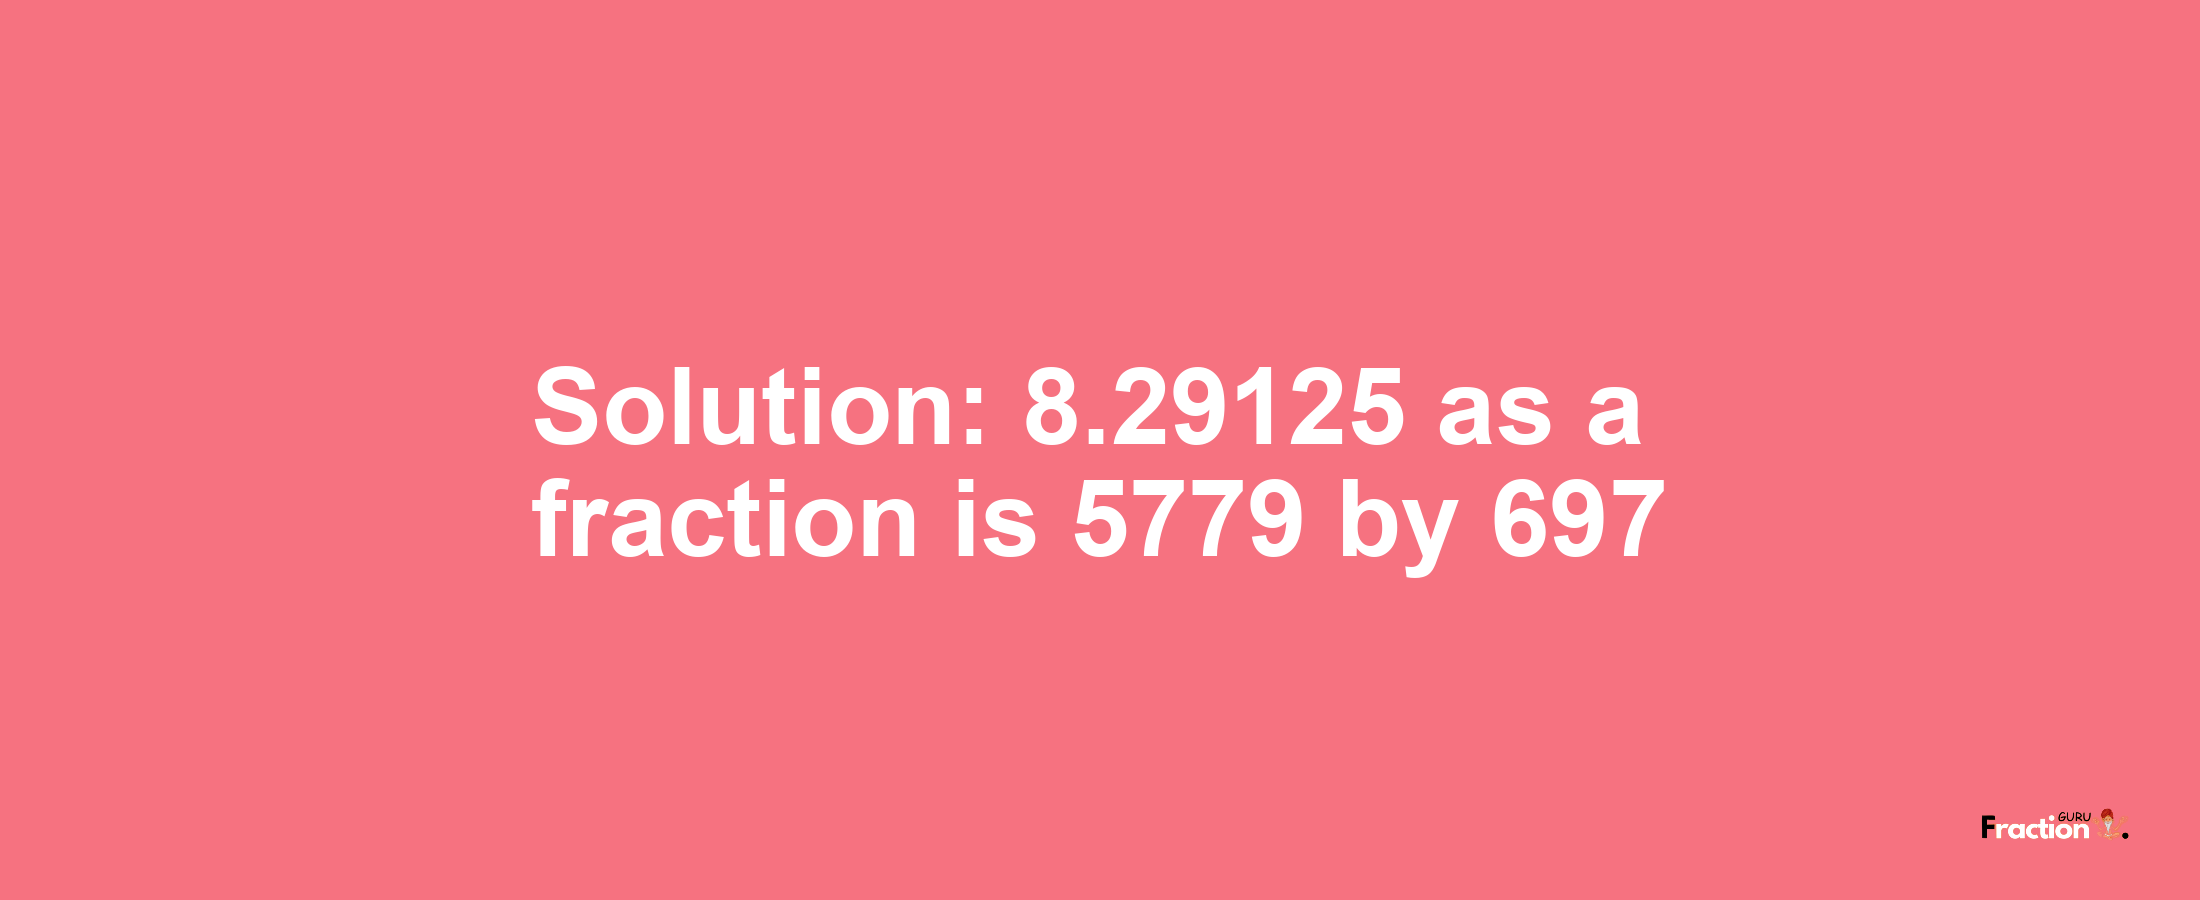 Solution:8.29125 as a fraction is 5779/697